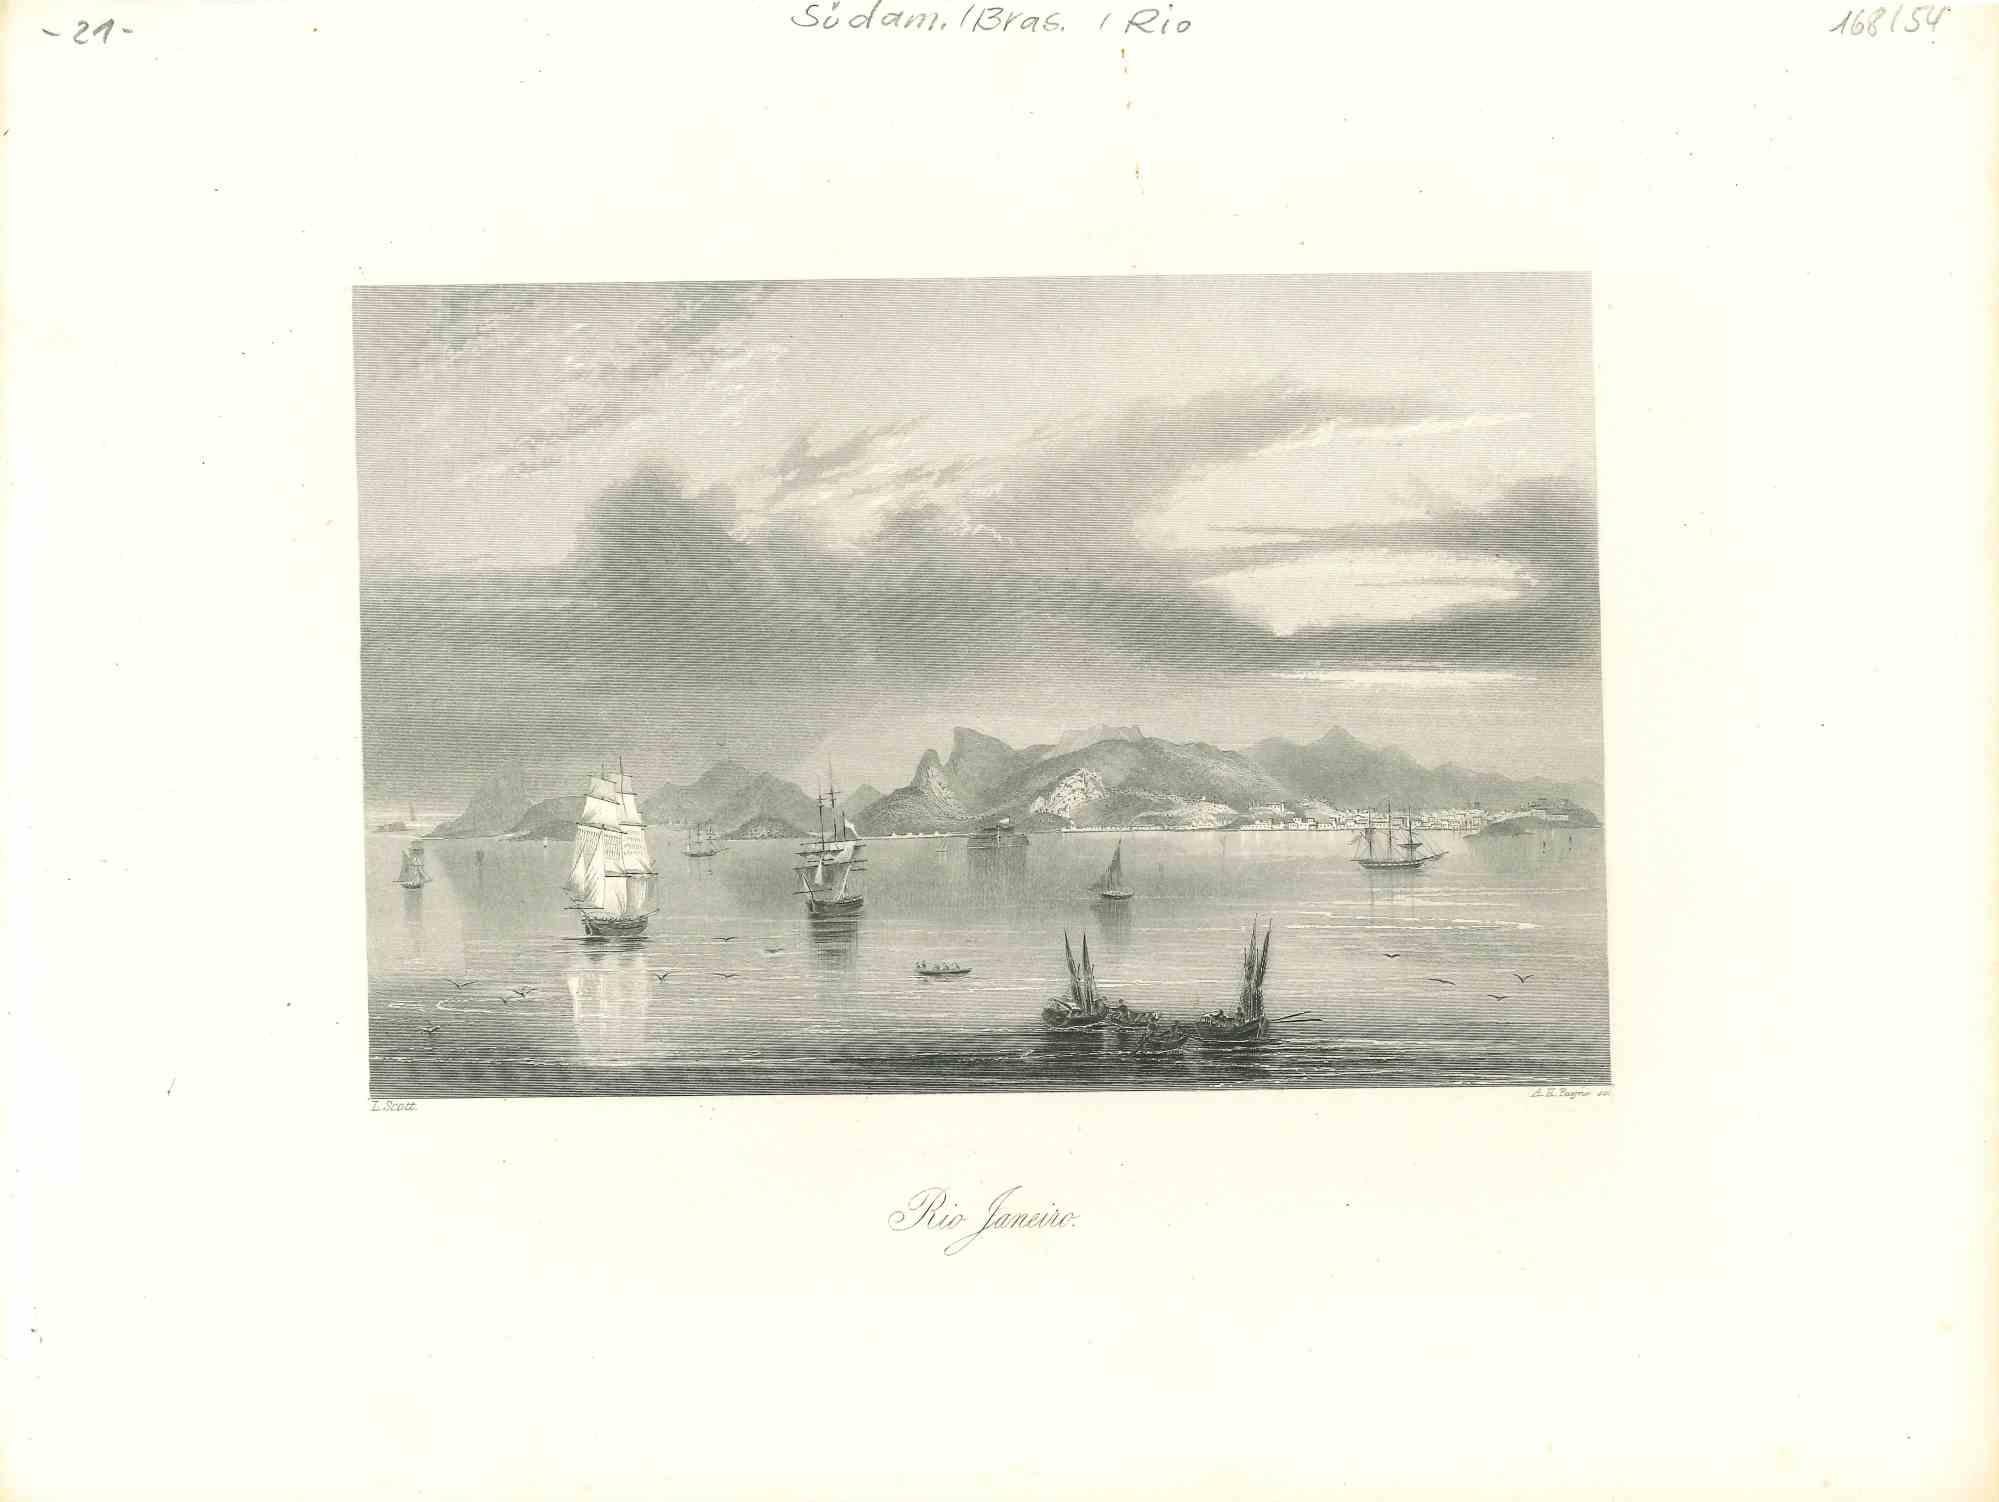 Unknown Figurative Print - Ancient View of Havannah - Original Lithograph - Early 19th Century